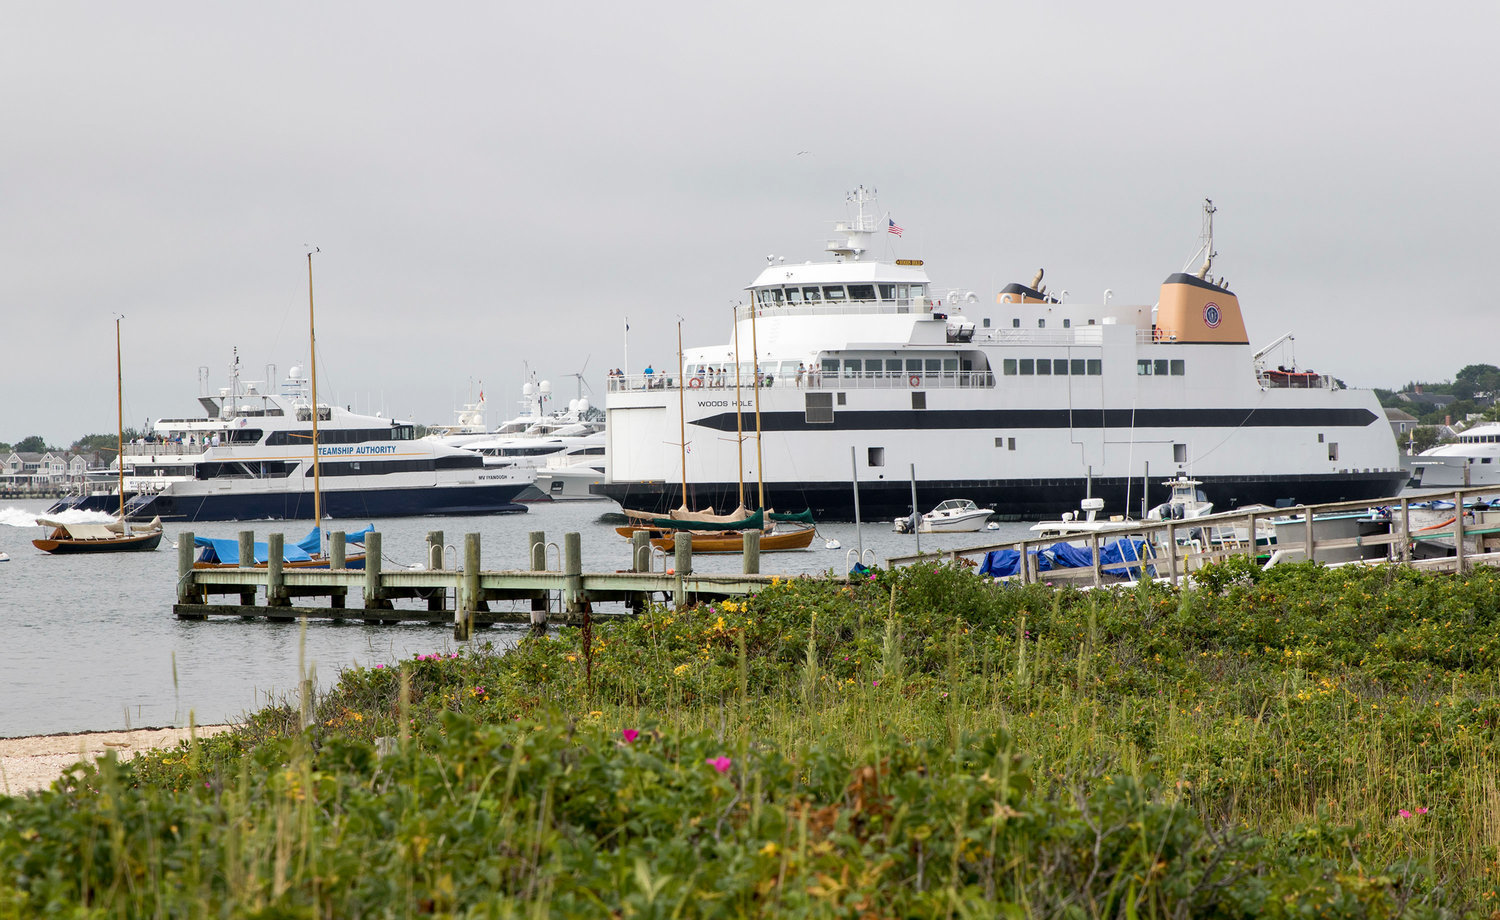 The SSA's fast ferry Iyanough and car ferry Woods Hole pass in Nantucket Harbor.